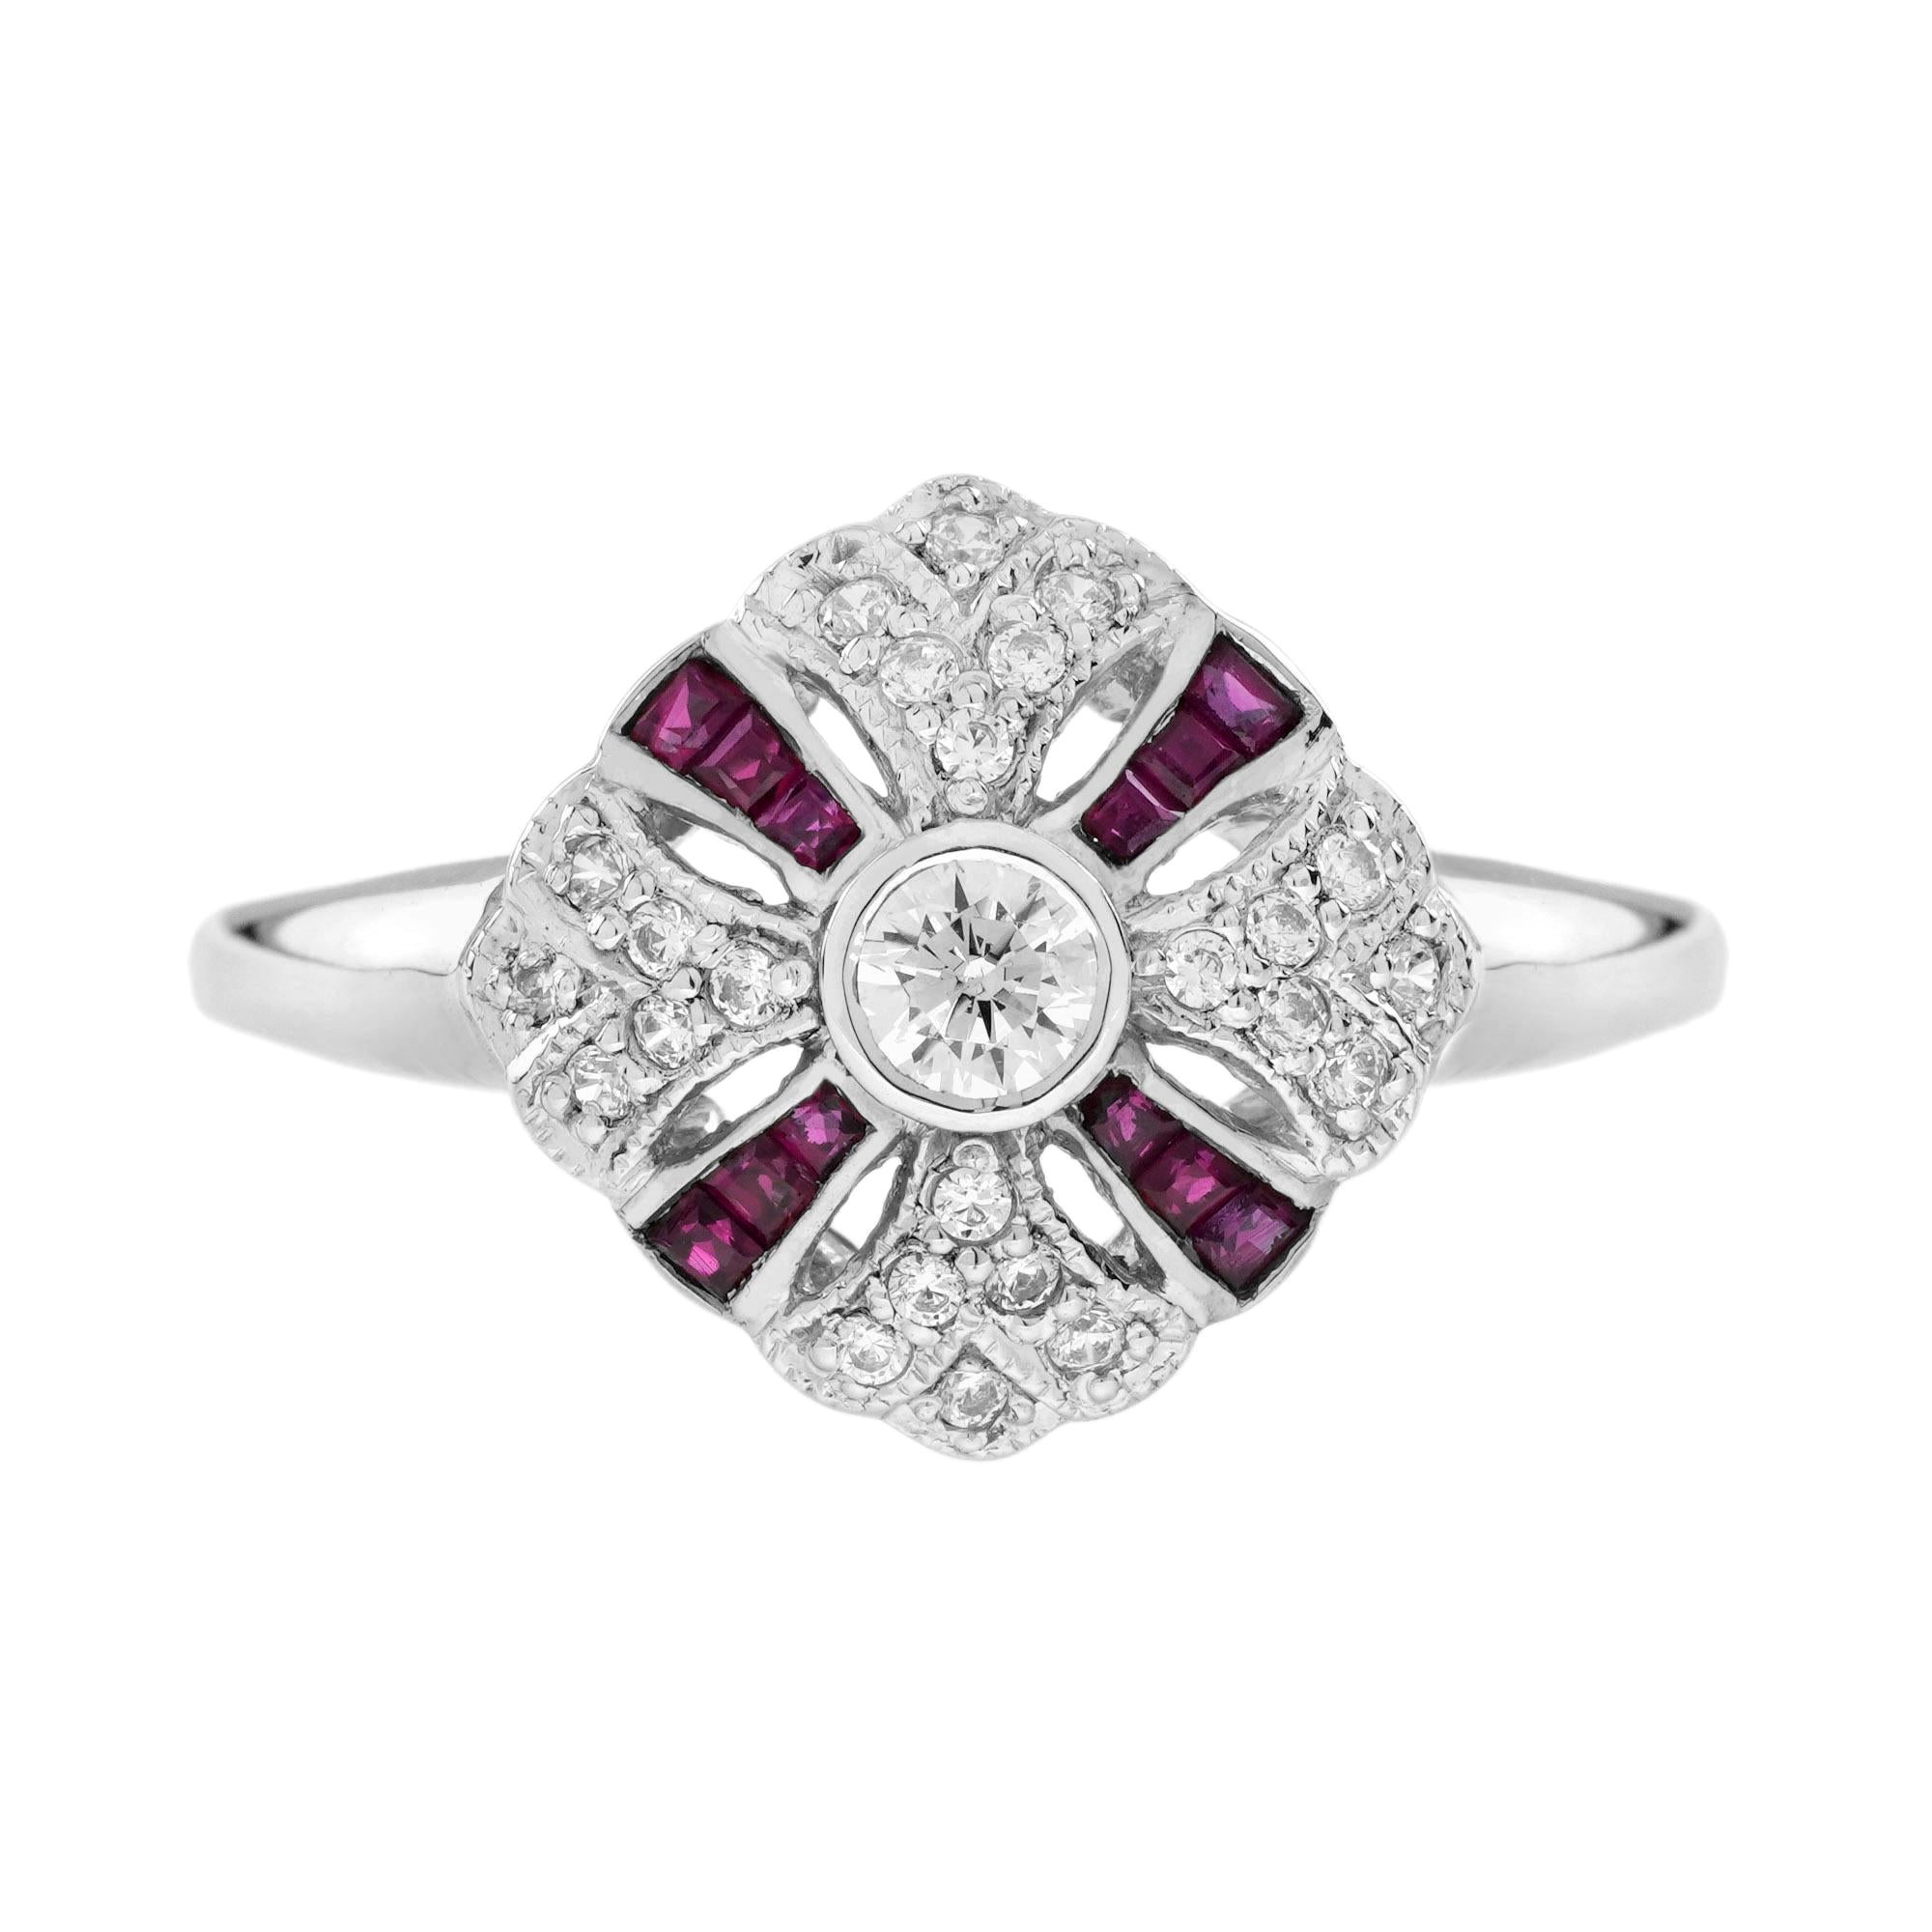 Diamond and Ruby Art Deco Style Engagement Ring in 14K White Gold For Sale